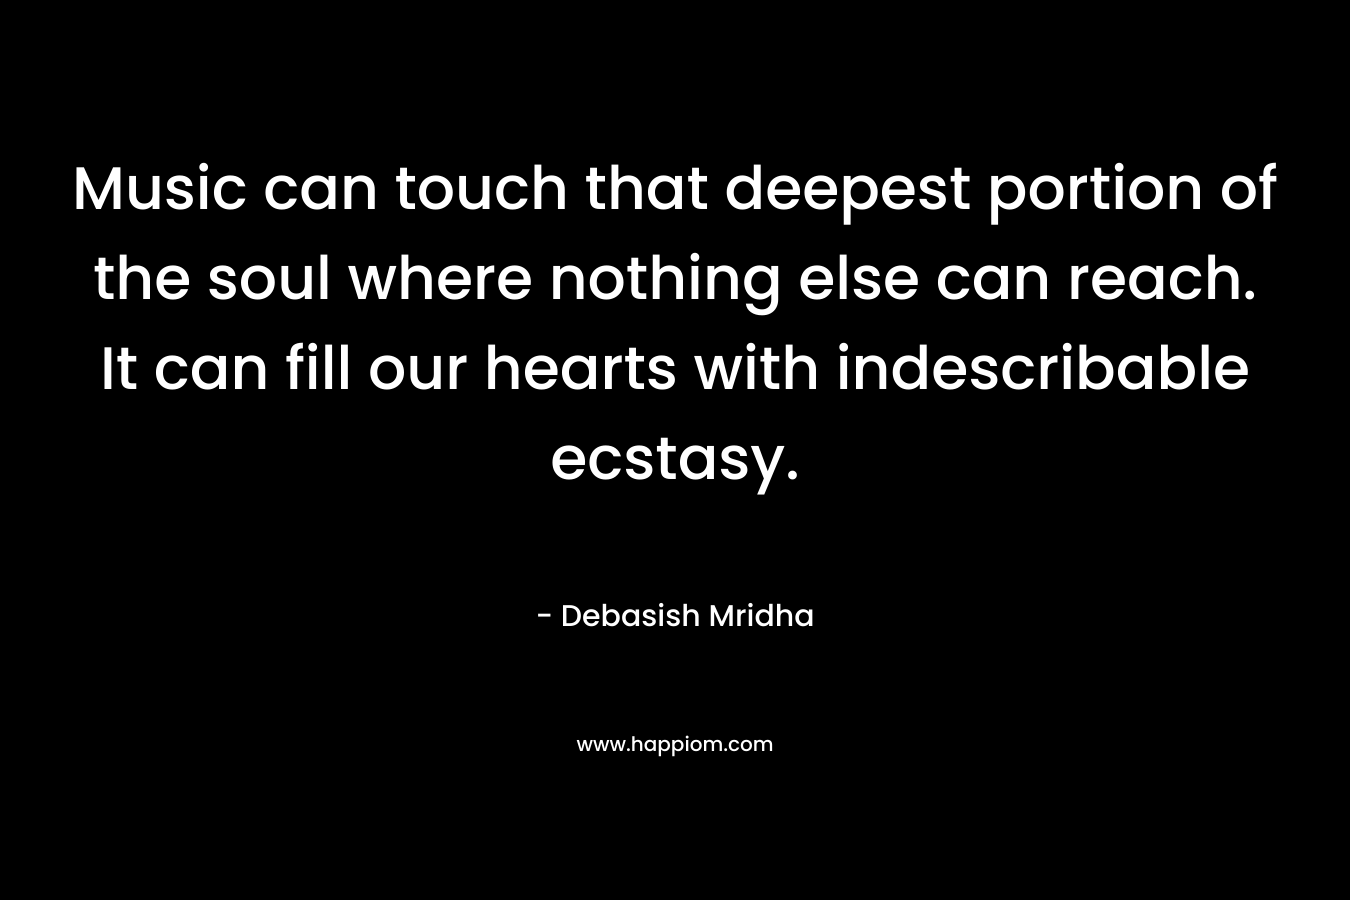 Music can touch that deepest portion of the soul where nothing else can reach. It can fill our hearts with indescribable ecstasy. – Debasish Mridha